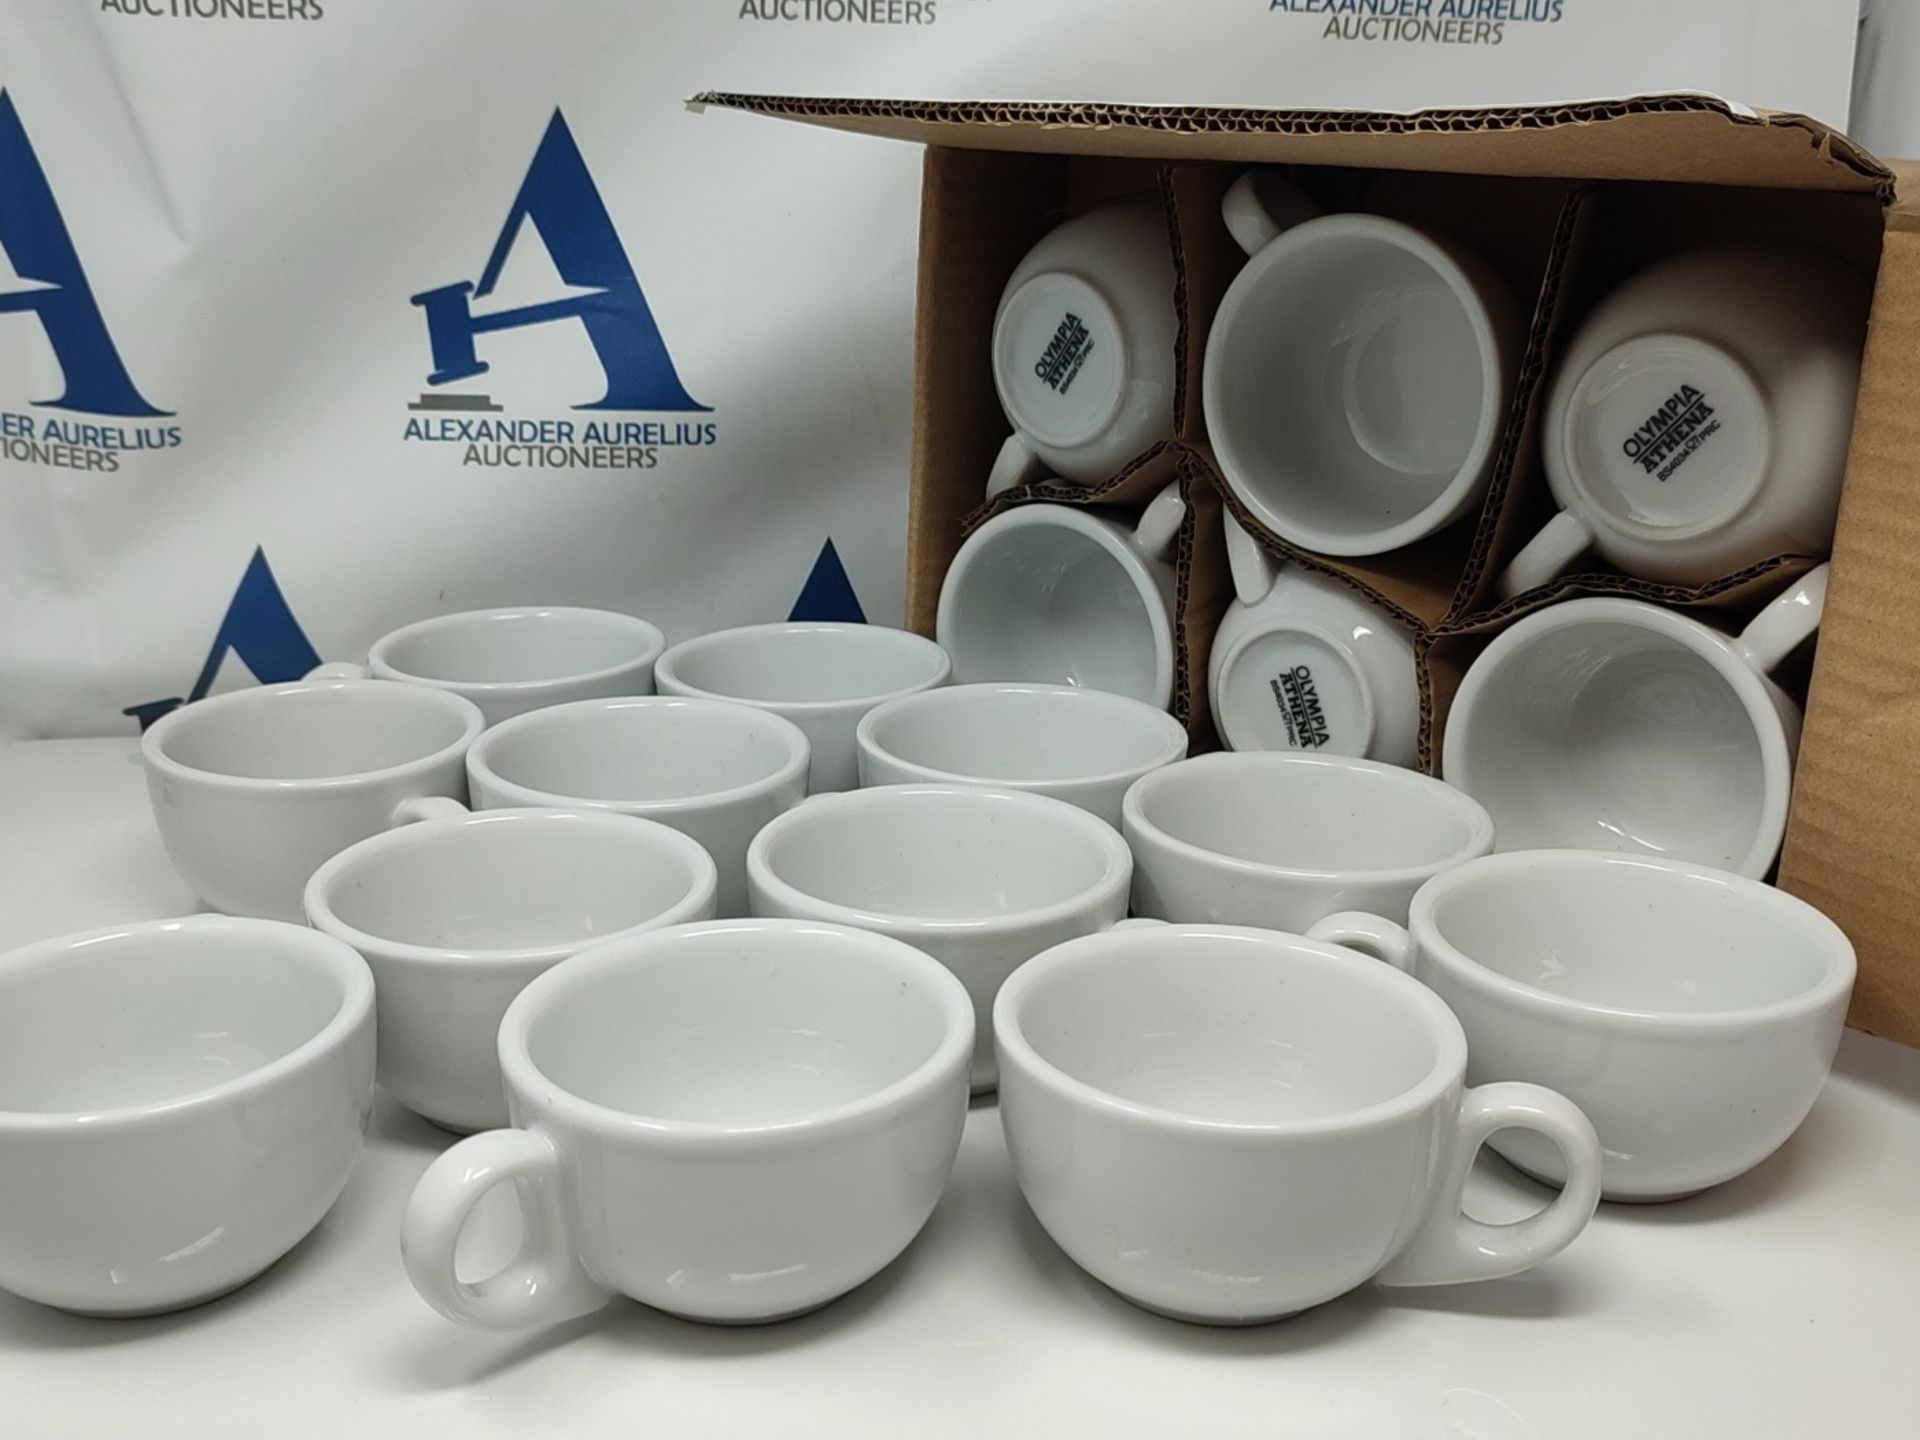 Olympia Athena Cappuccino Coffee Cups 220 ml/8 oz (Pack of 24), White Porcelain, Teacu - Image 2 of 2